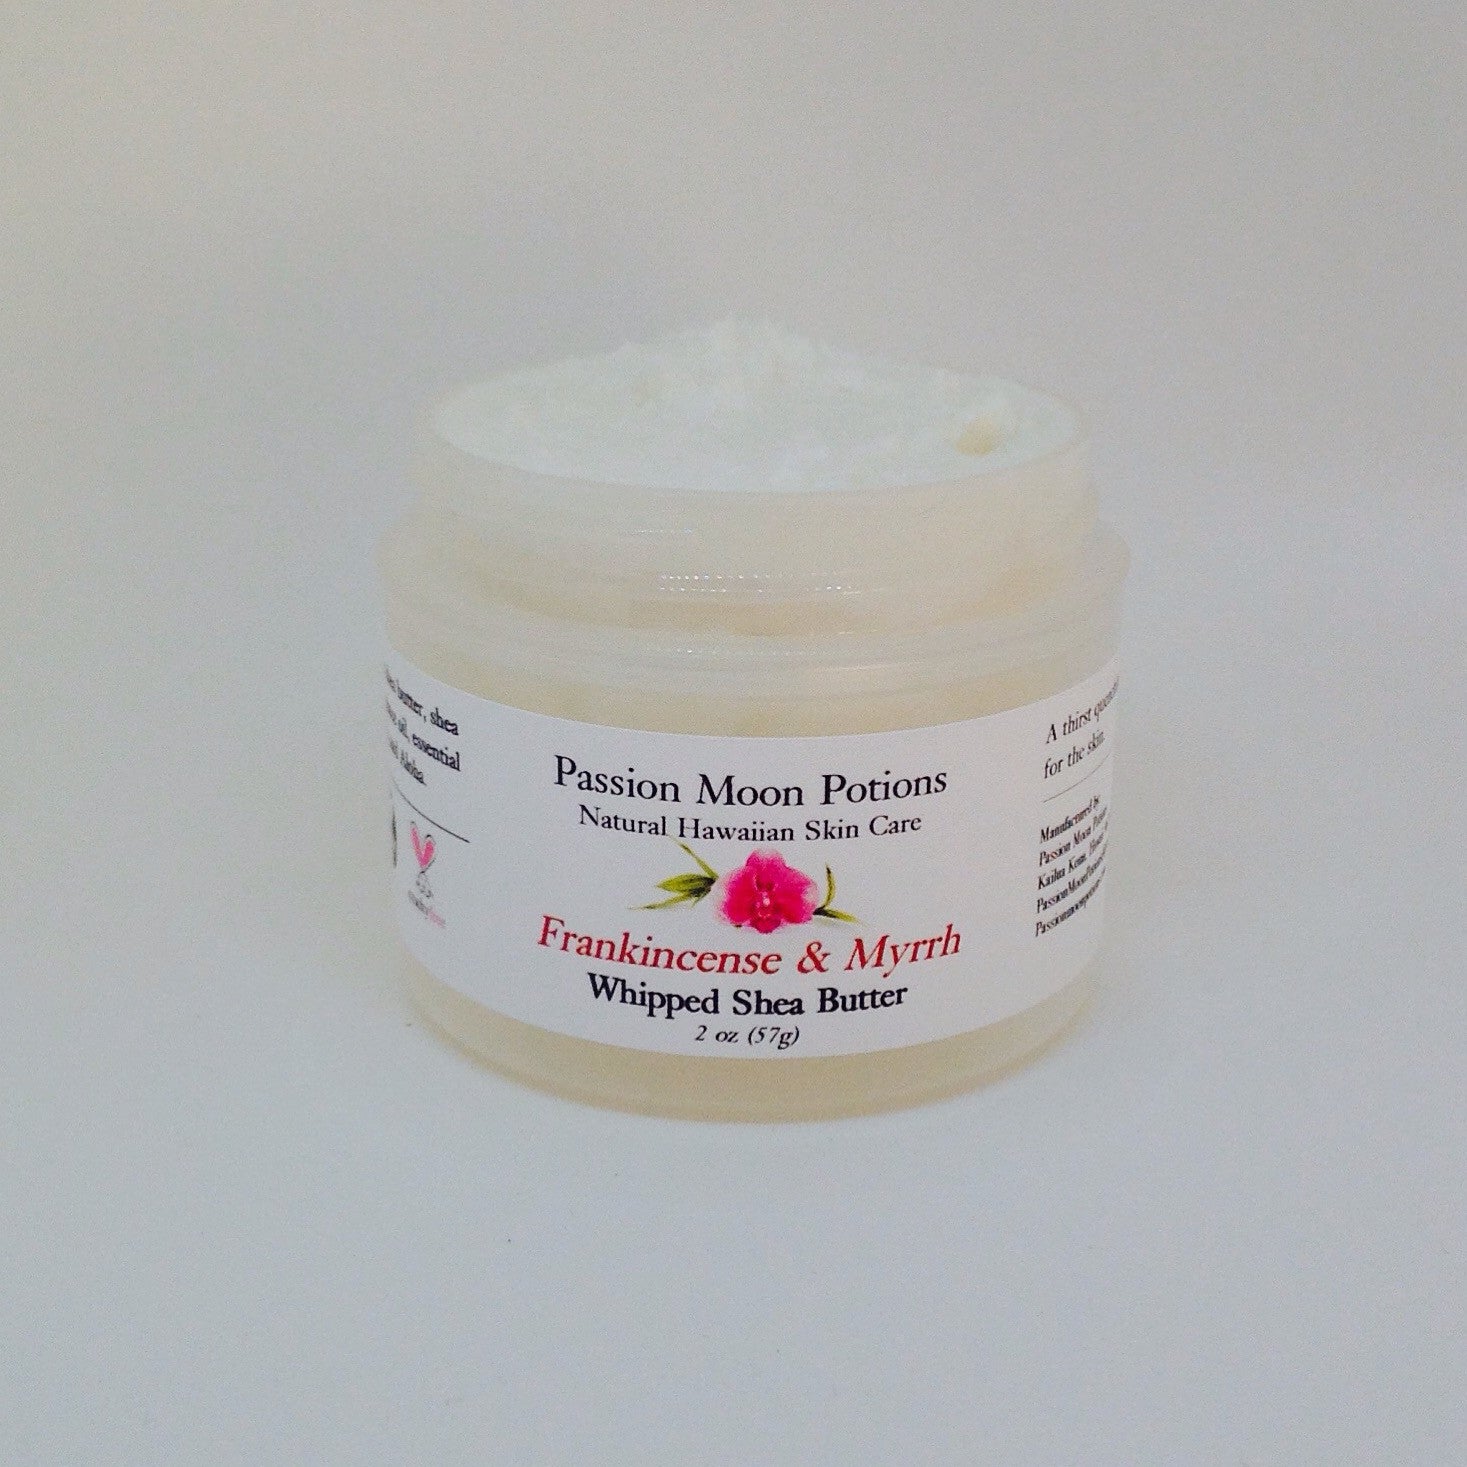 Whipped Shea Butter - Passion Moon Potions - 2